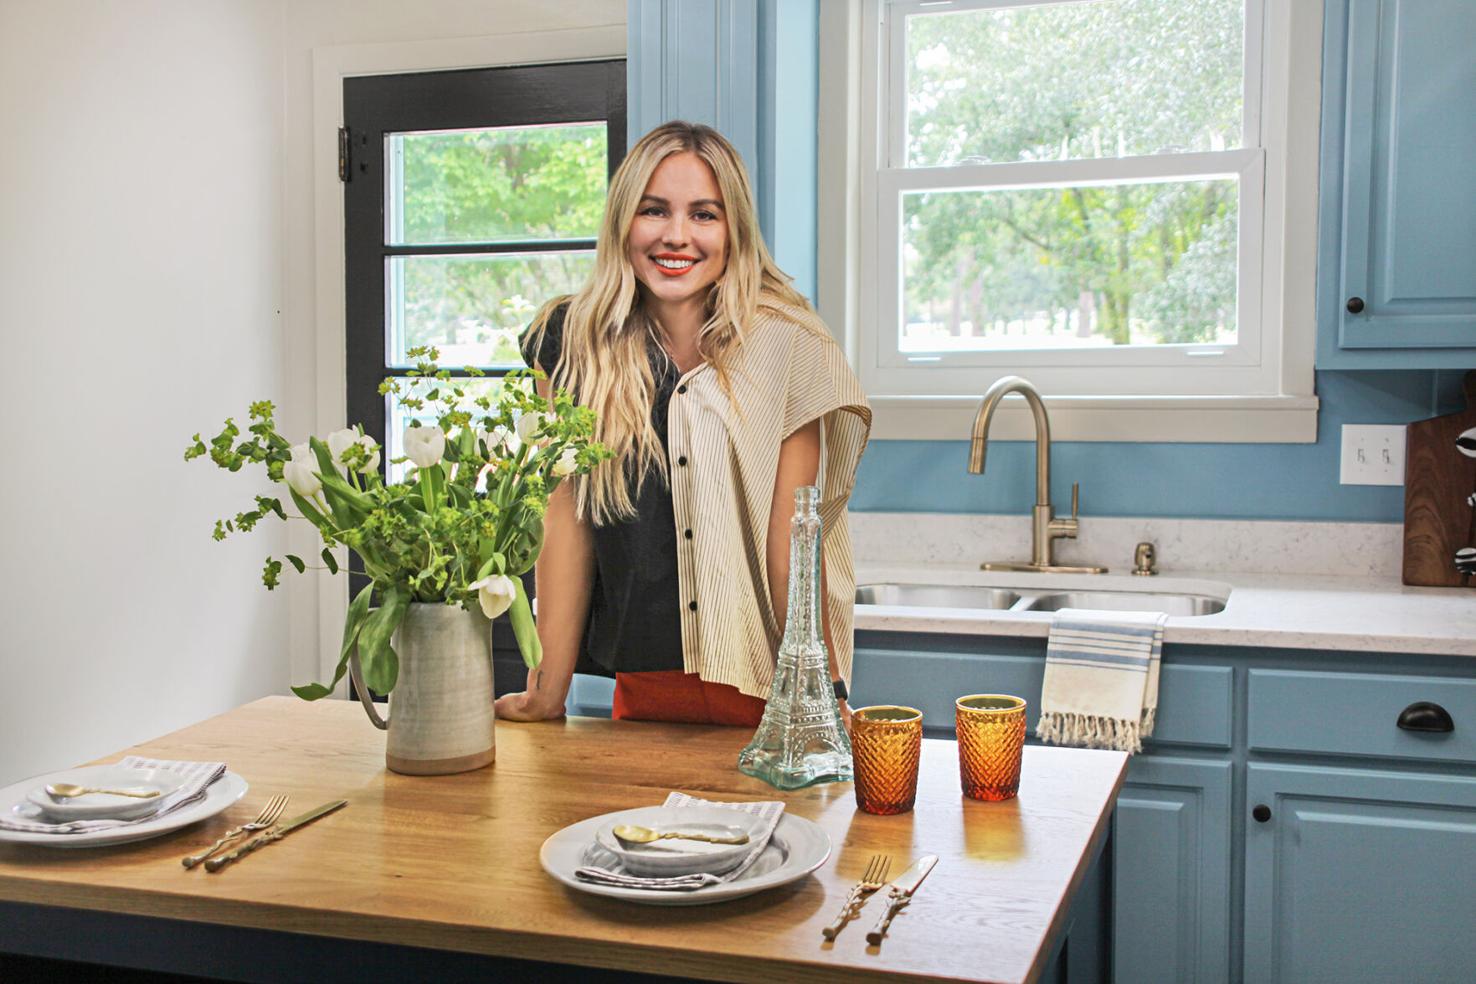 She’s “Breaking Bland”: A conversation with HGTV’s newest